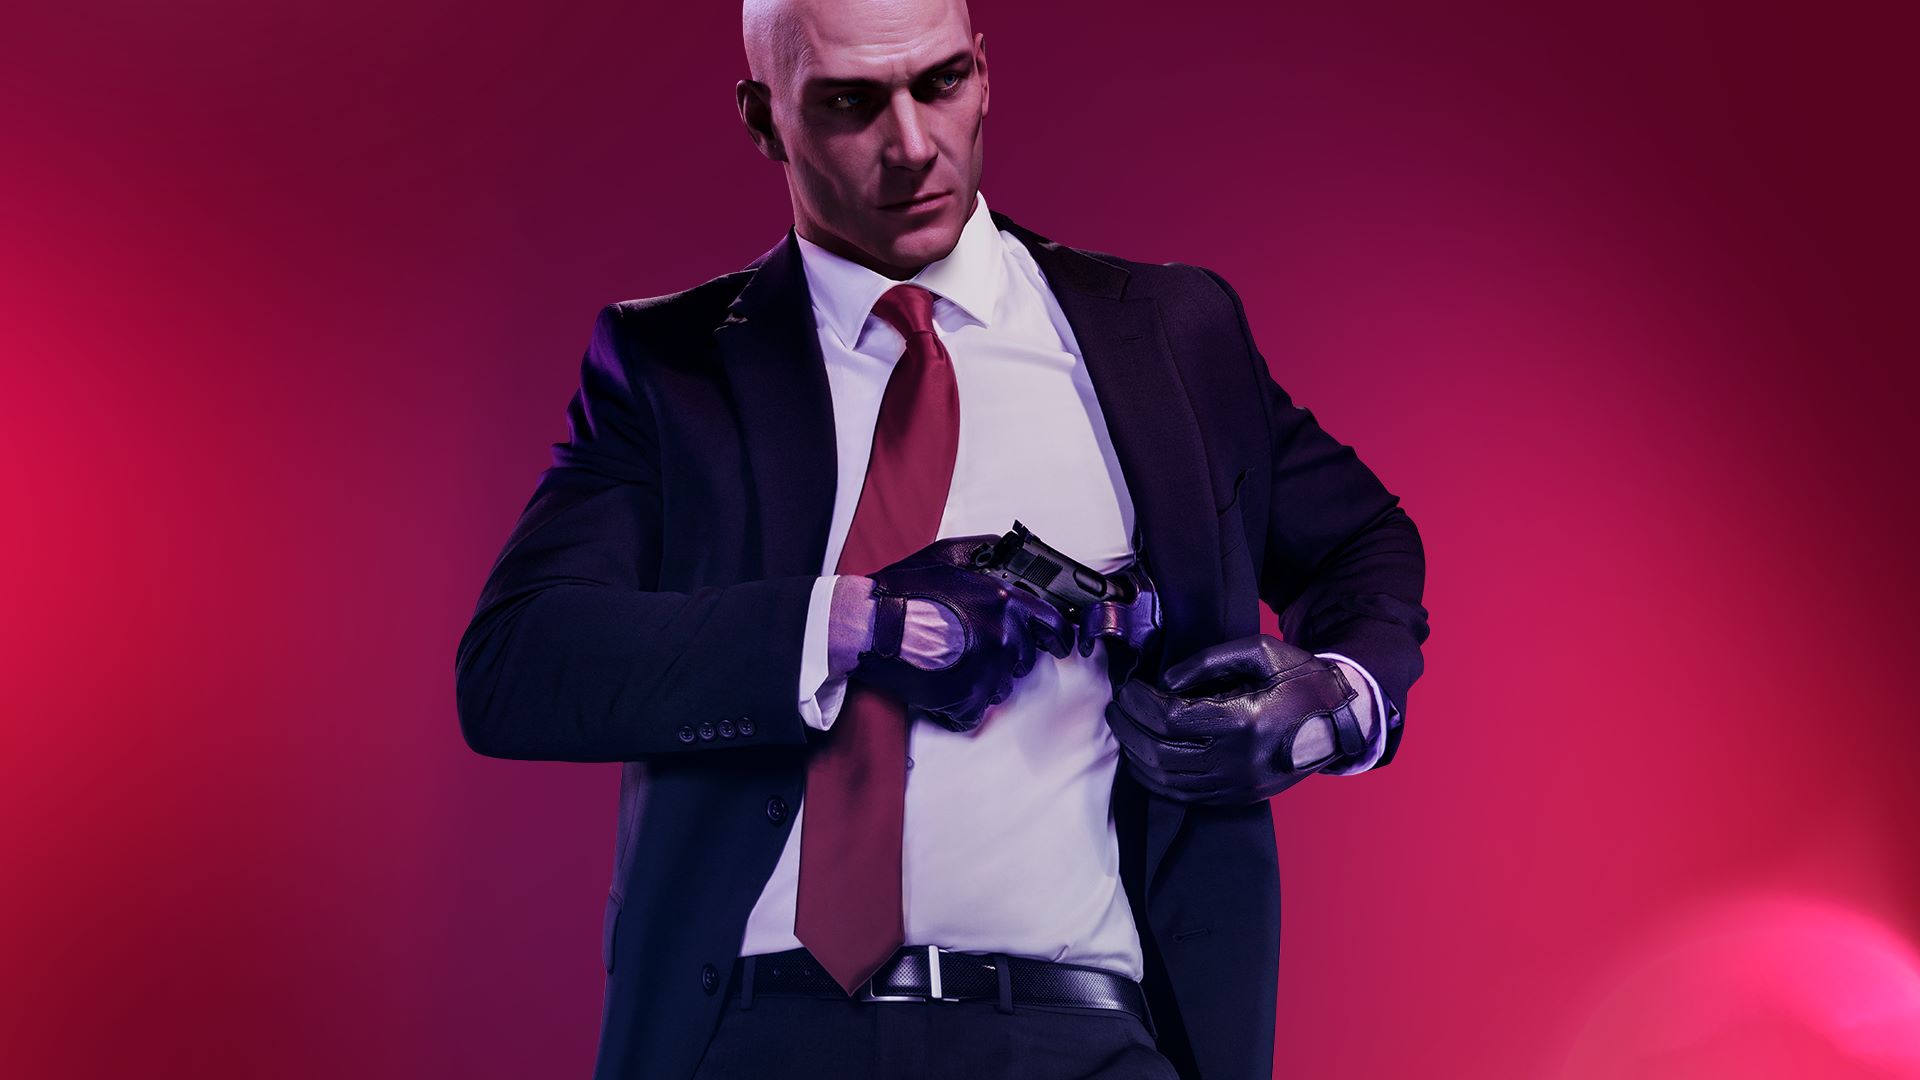 Agent 47 is going to shoot you